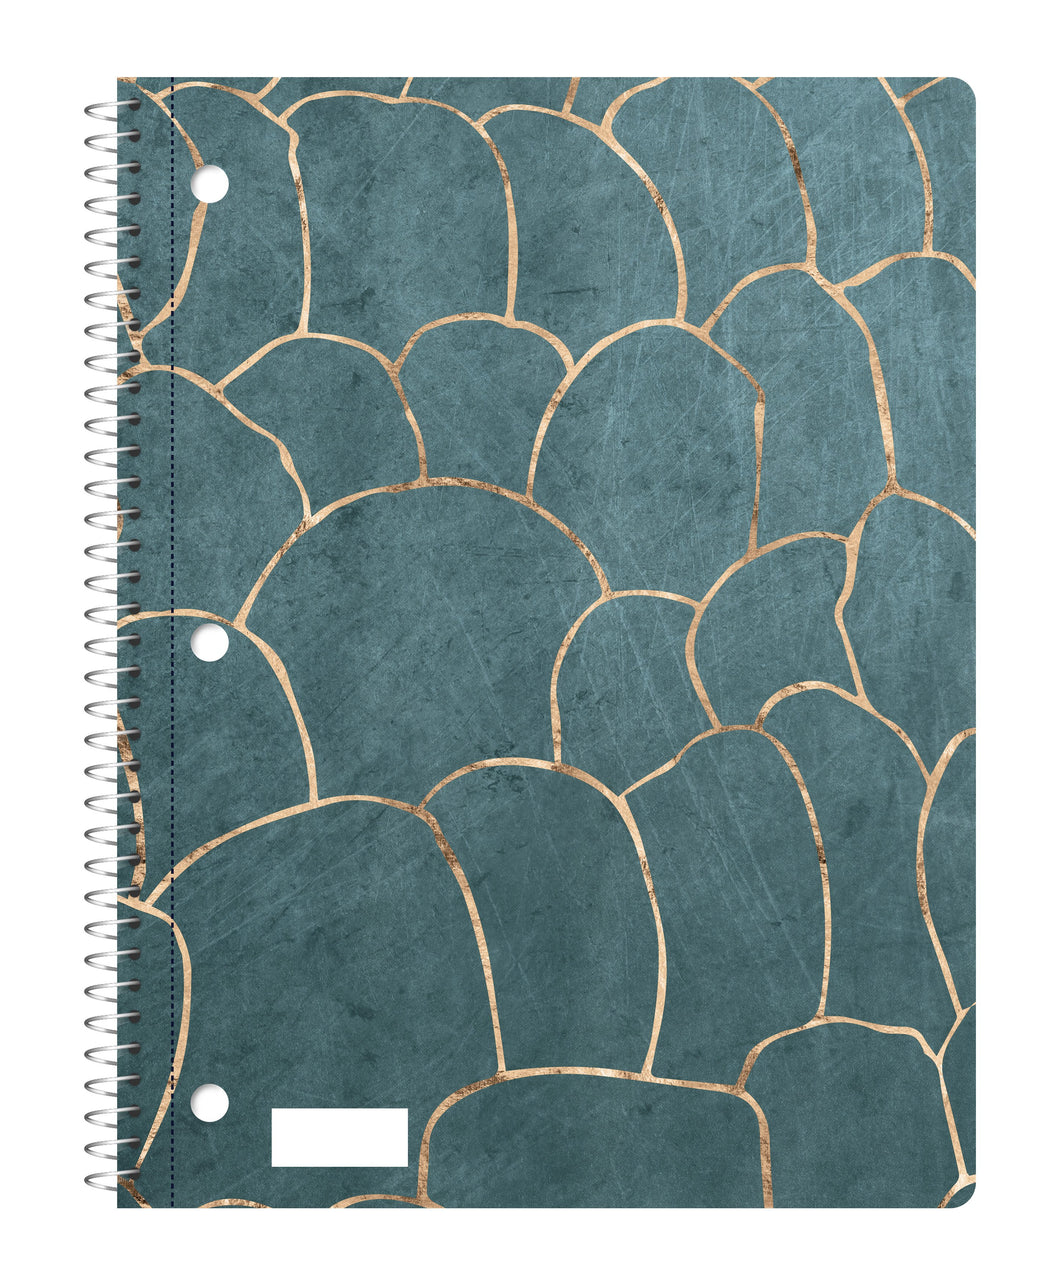 70 Sheets 10-1/2 x 8 Inch,Gold or Metallic Cover 1-Subject Spiral Notebook